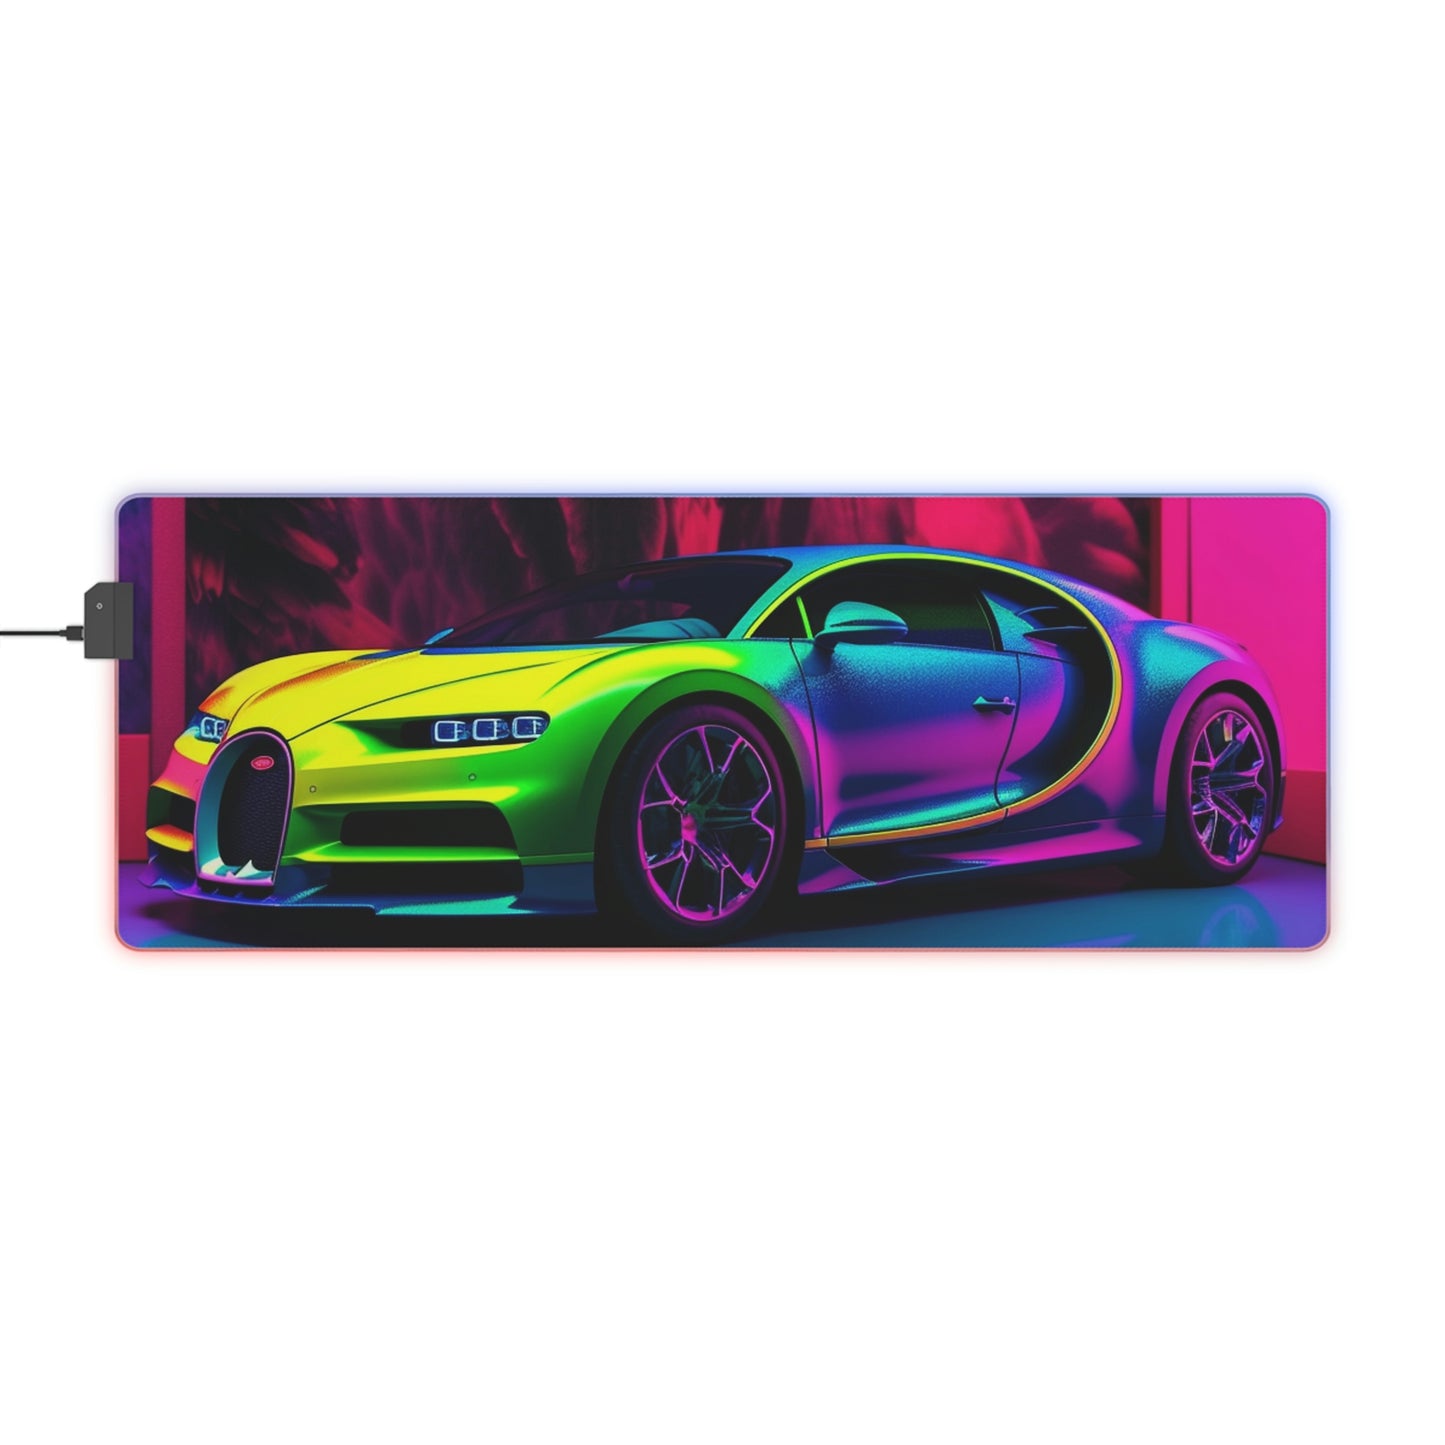 LED Gaming Mouse Pad Florescent Bugatti Flair 1